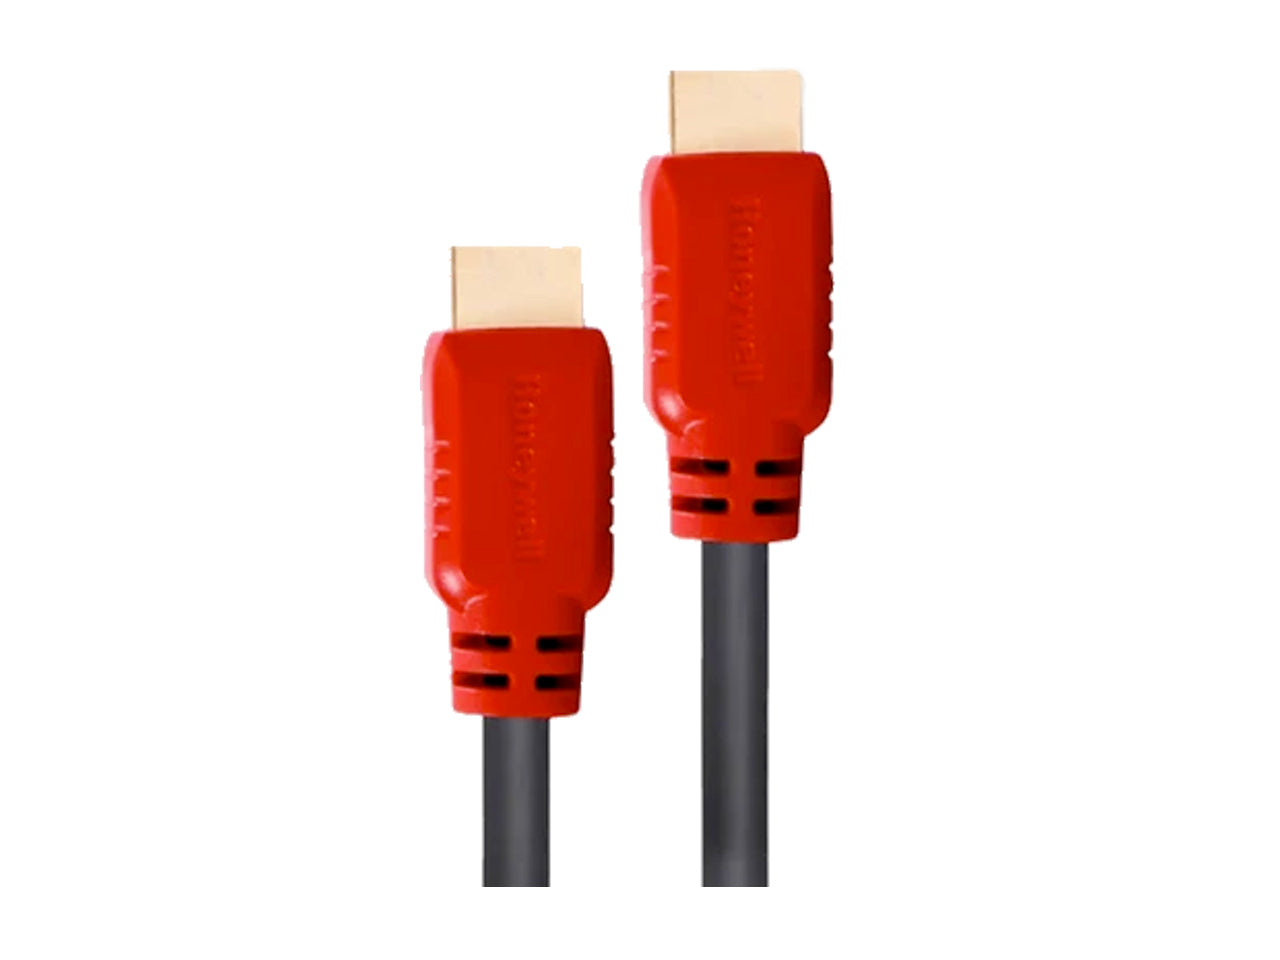 Honeywell HDMI 1.4 Cable with Ethernet | High Speed HDMI Cable 10.2GBPS | Supports 3D /4Kx2K Ultra High Definition | 3D Home Theatre | 3D Gaming | Black (16.4ft/5M)-HDMI Cables-Honeywell-computerspace